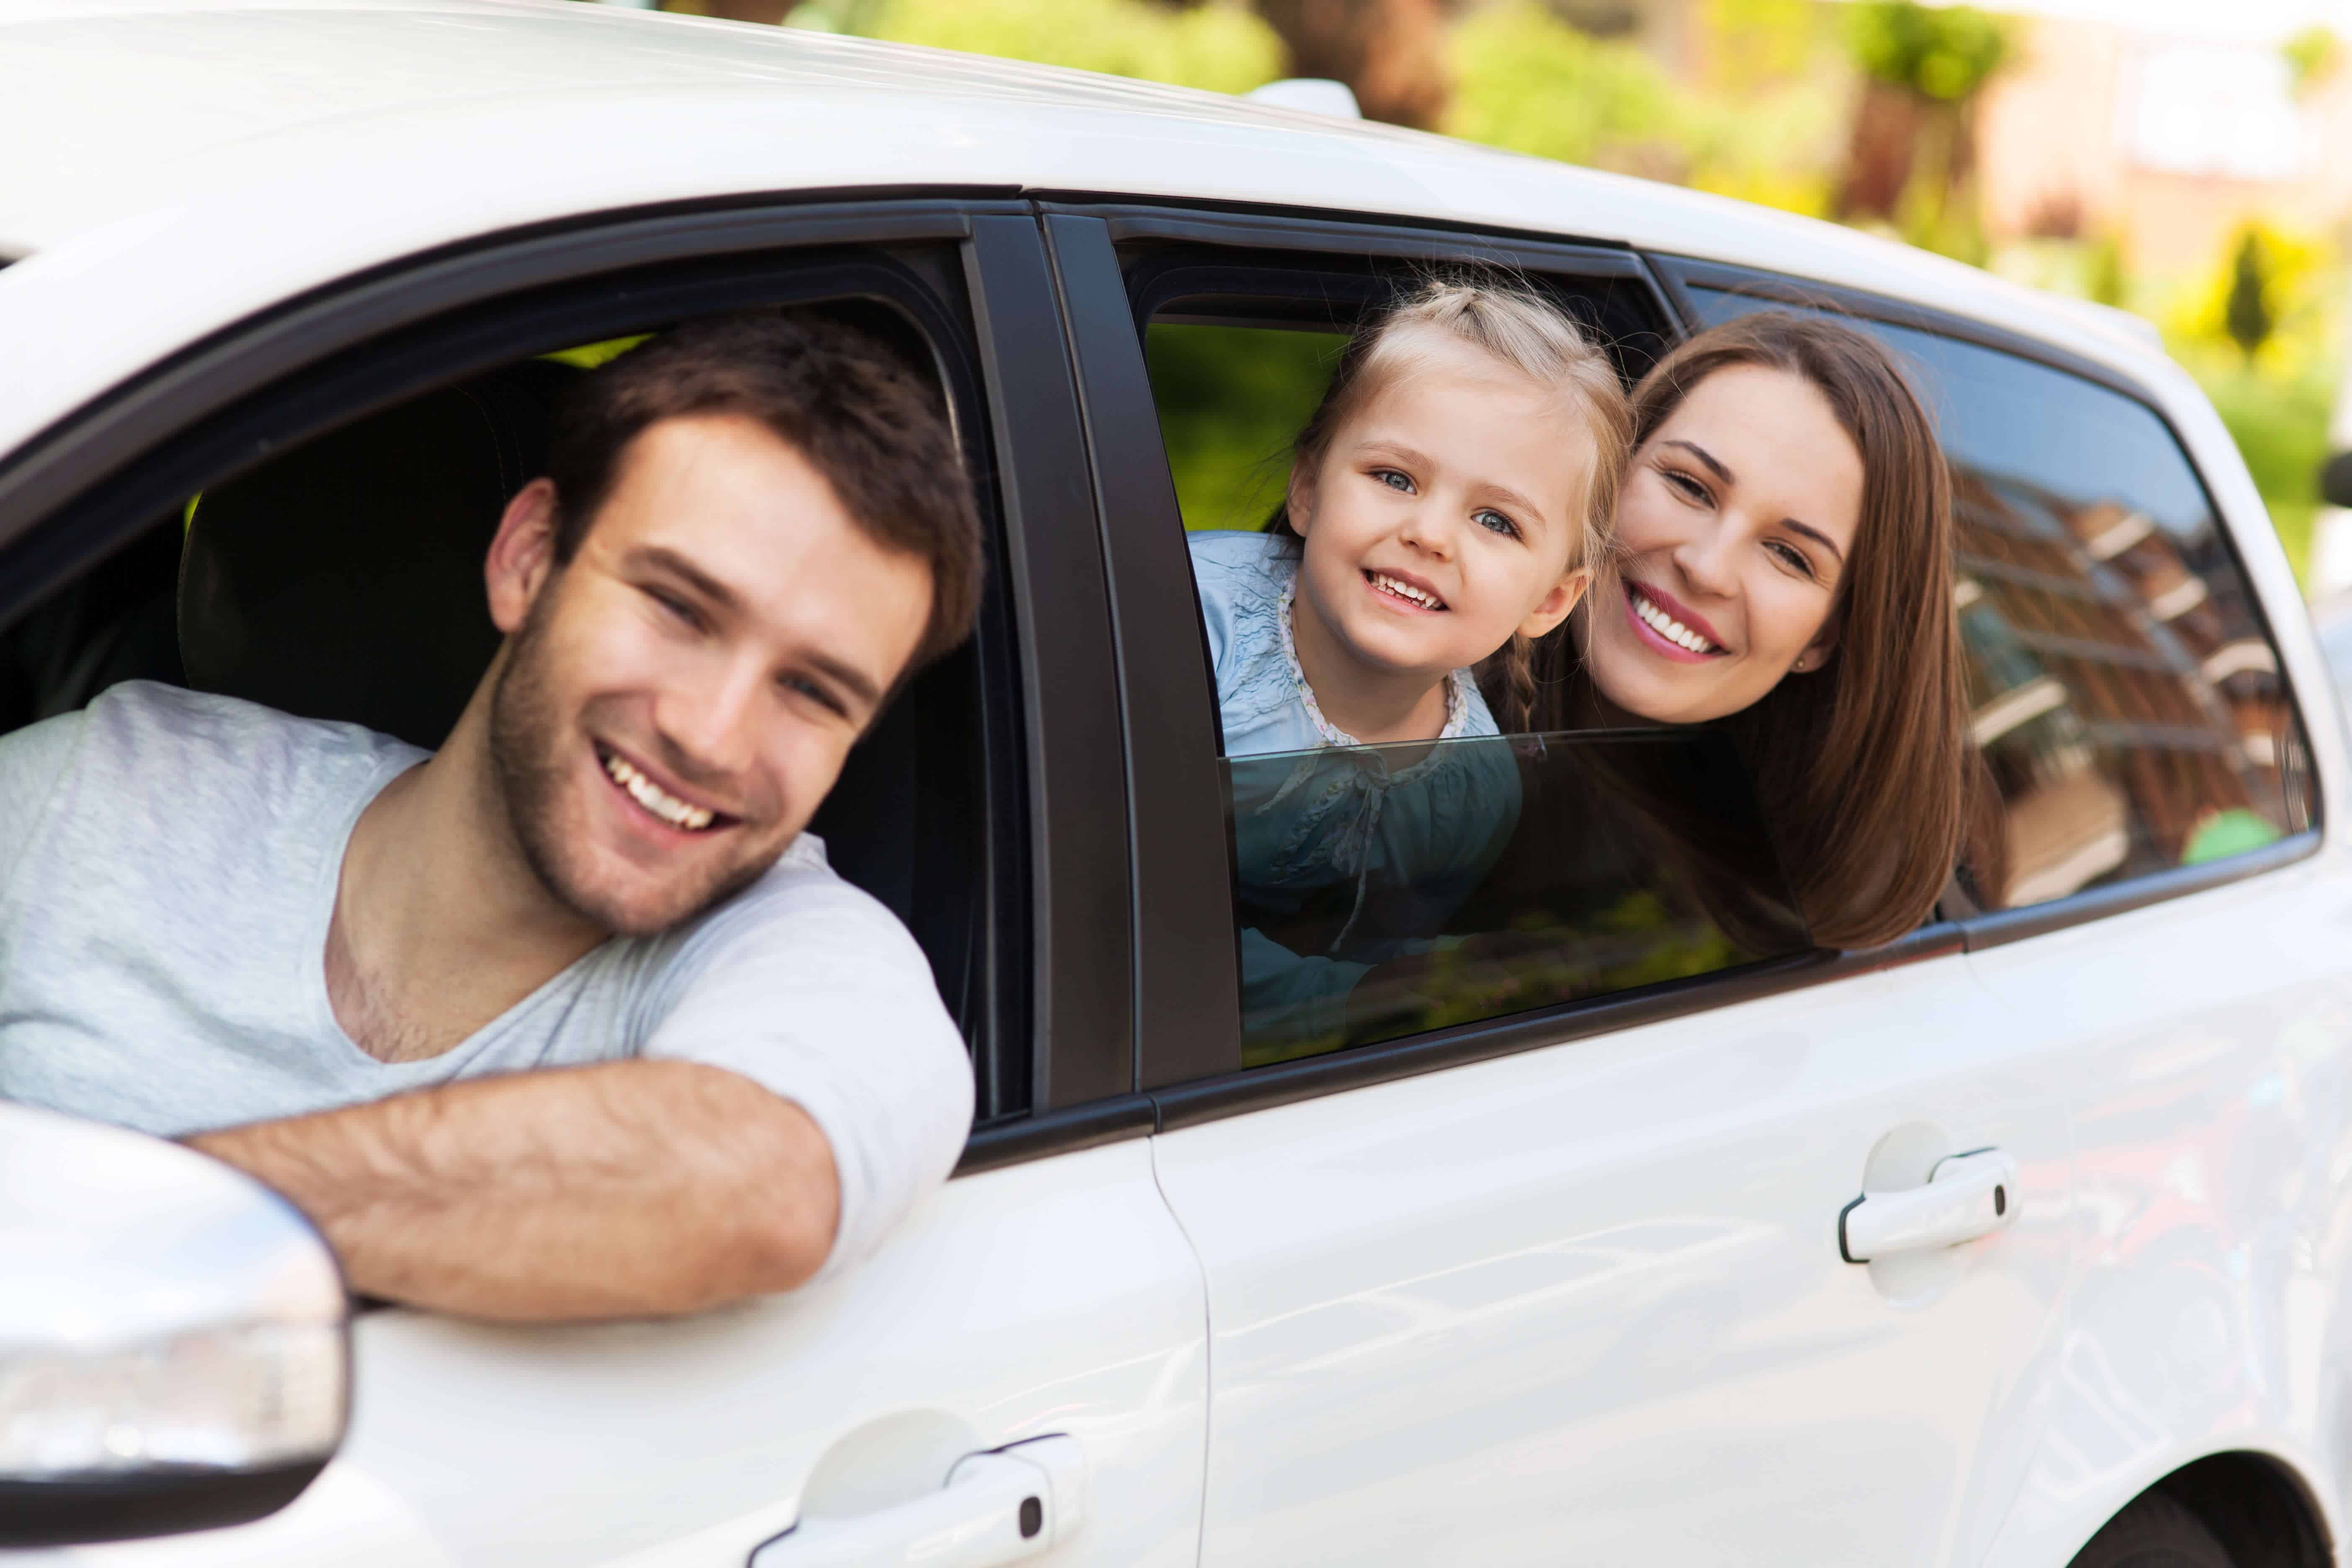 alt="White car with a family, the father is the driver, they're all looking out the window smiling."